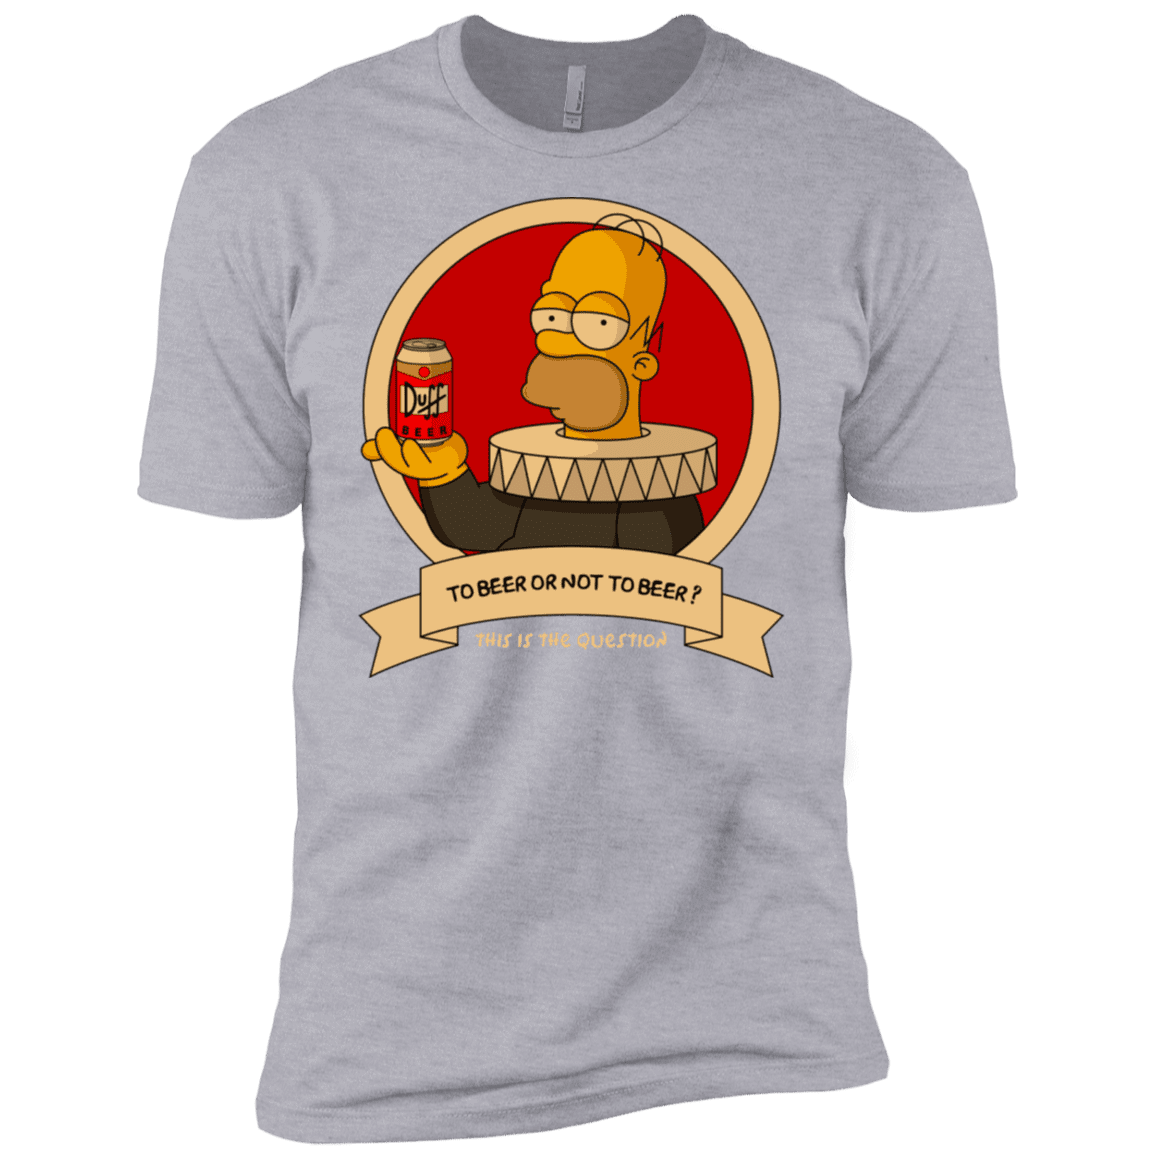 T-Shirts Heather Grey / X-Small To Beer or not to Beer Men's Premium T-Shirt